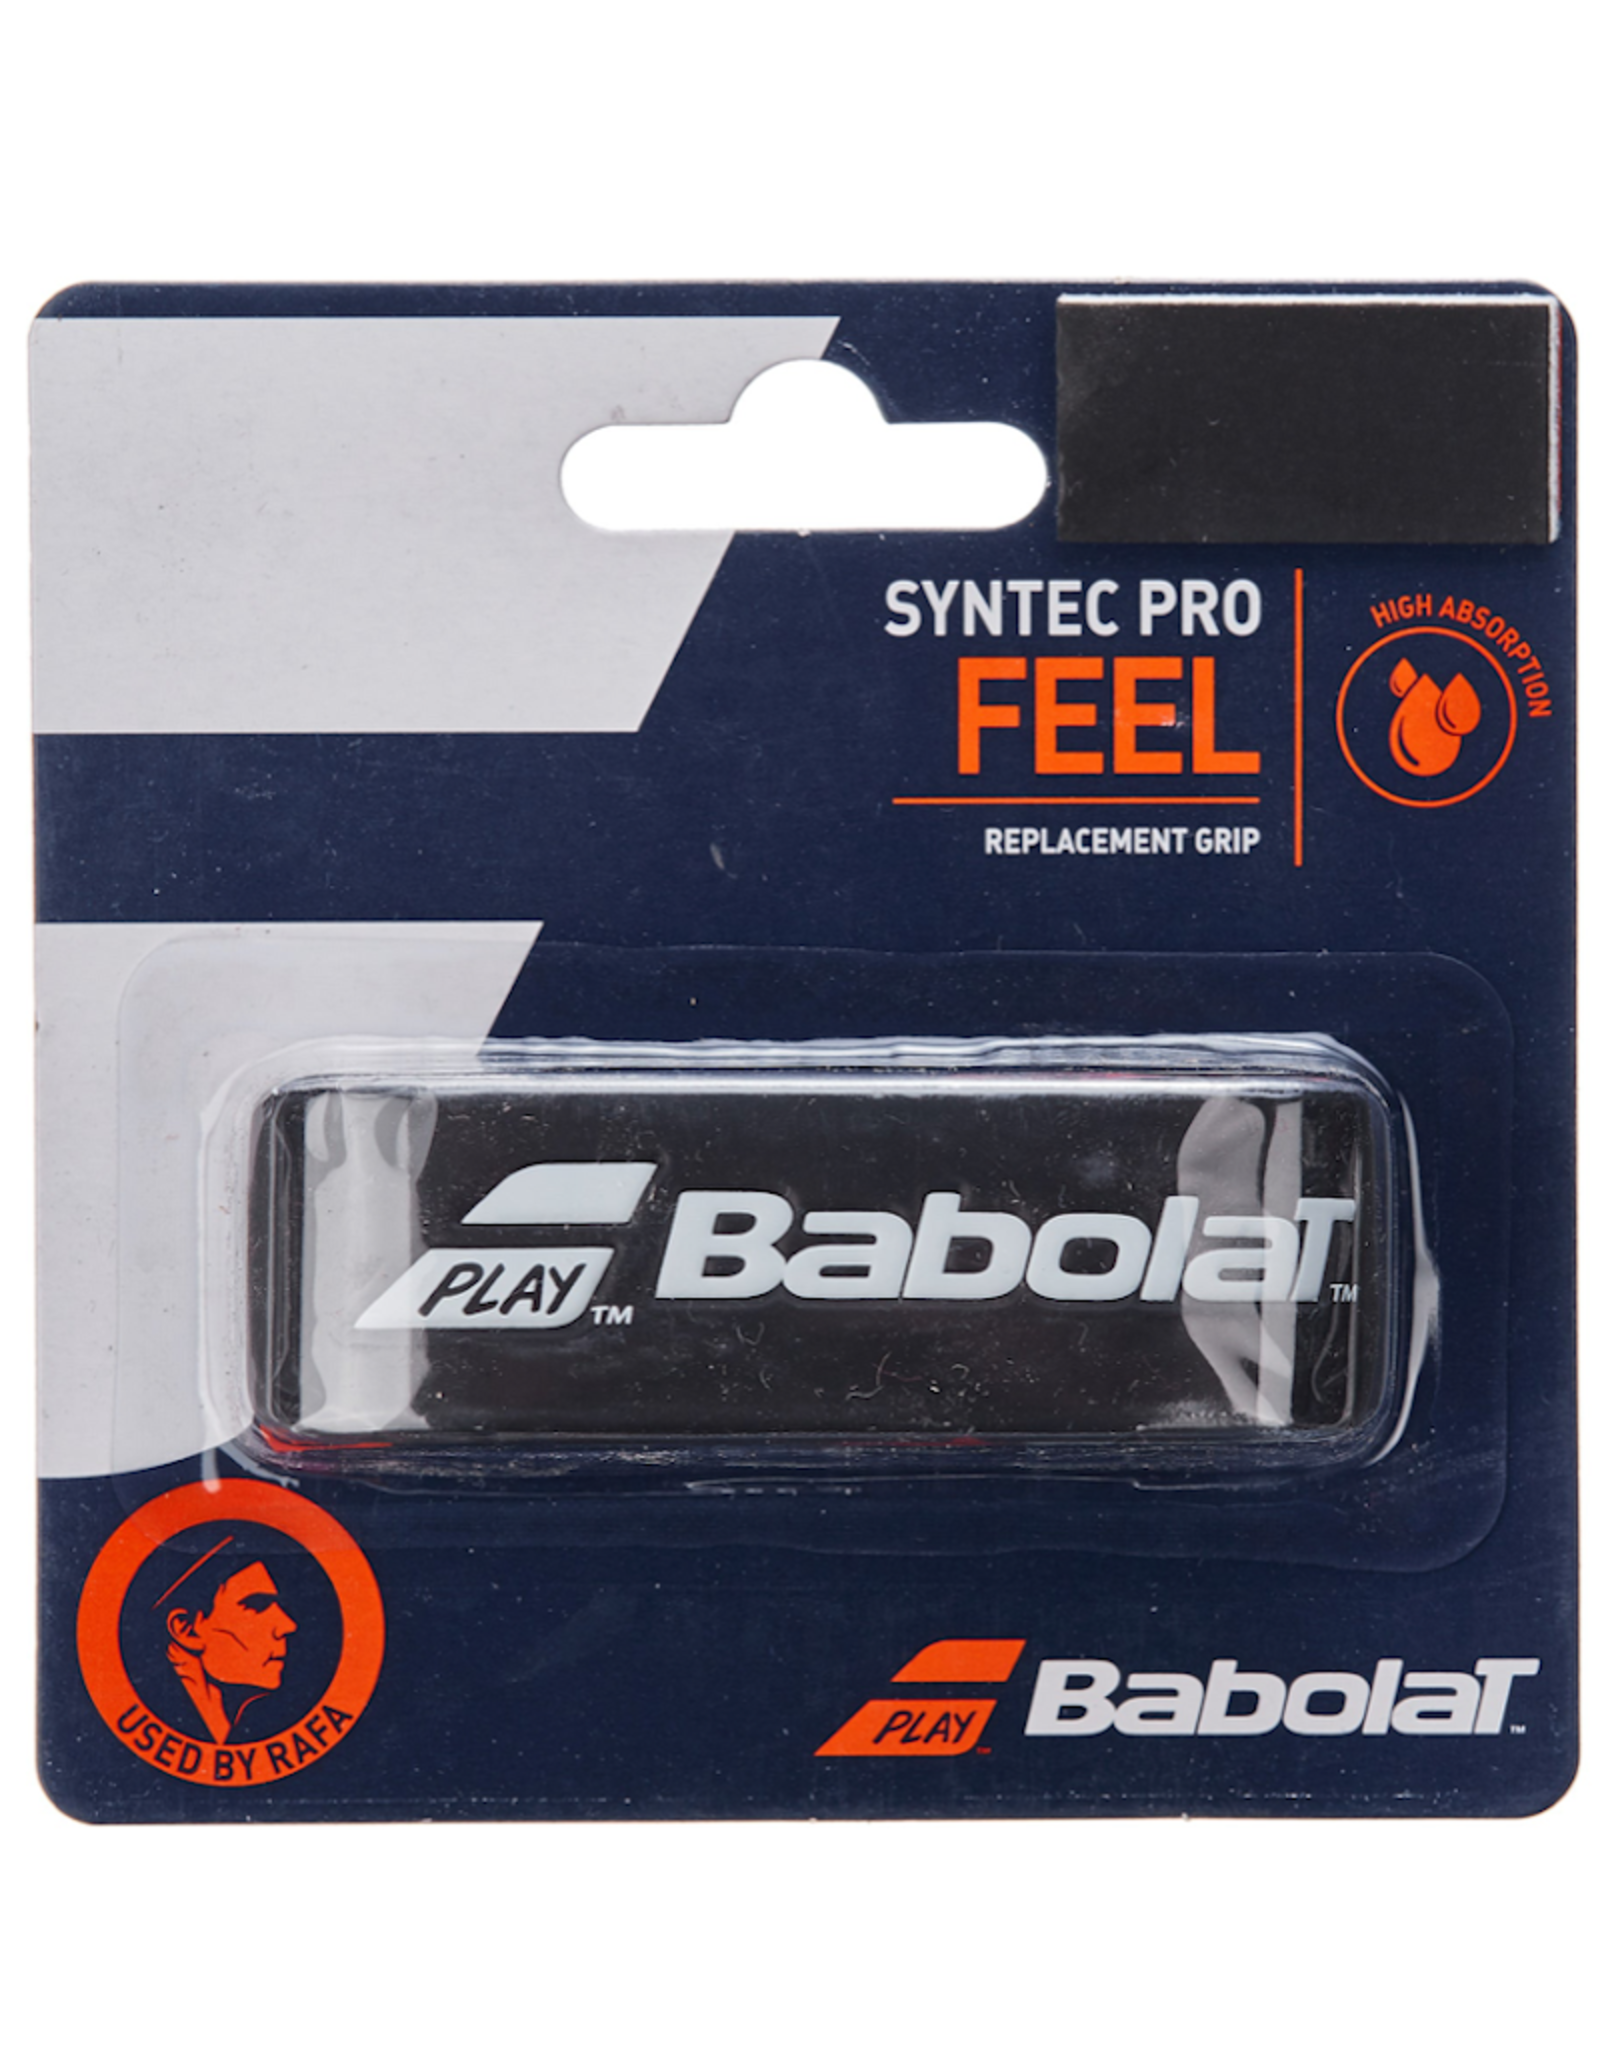 BABOLAT SYNTEC PRO REPLACEMENT GRIP BLACK